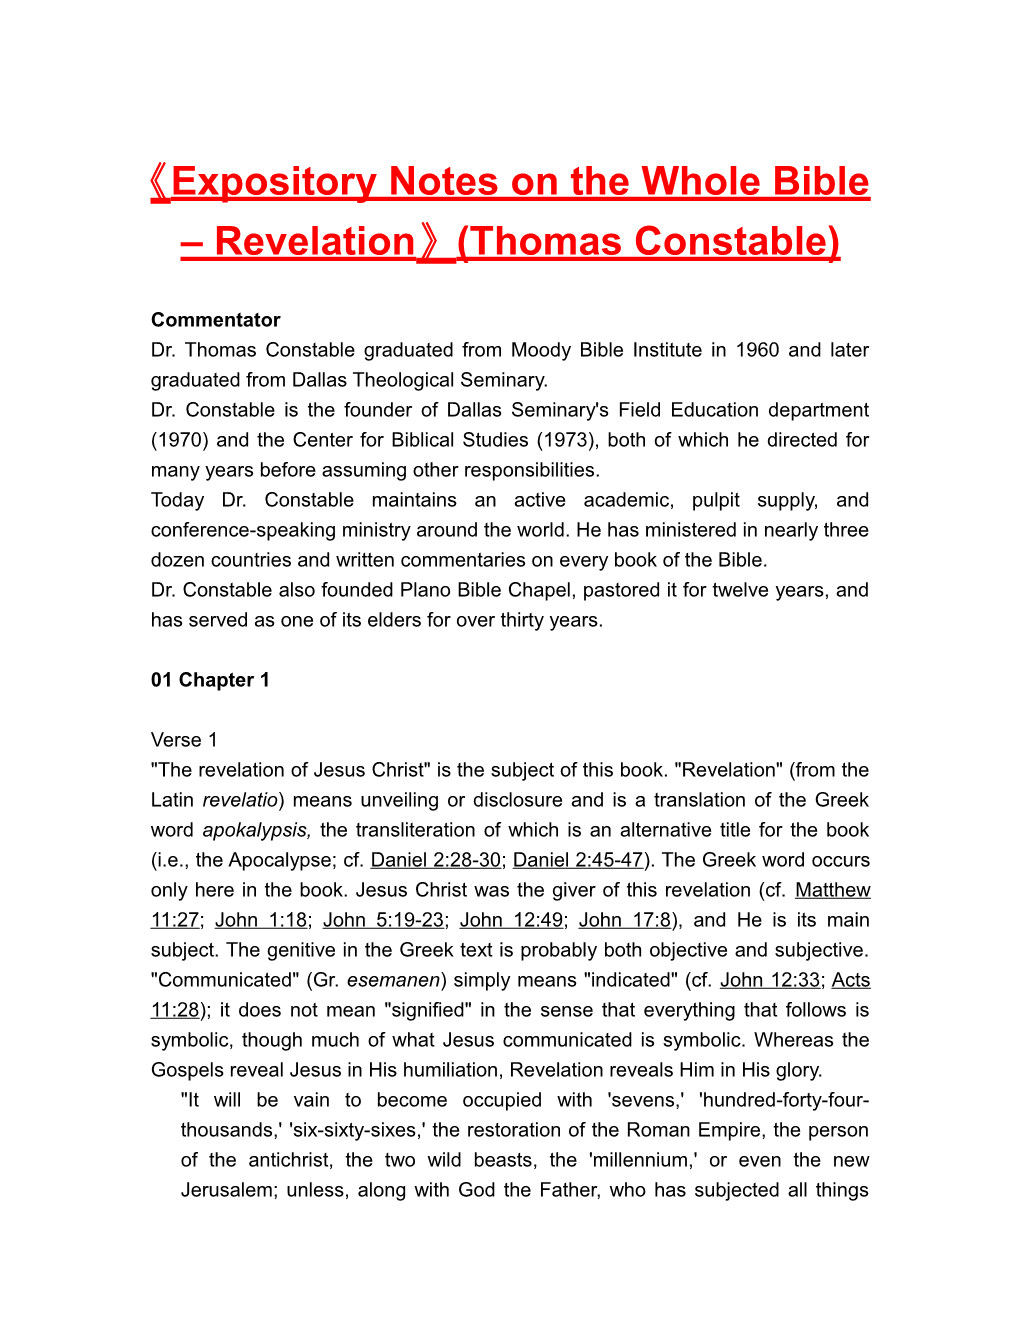 Expositorynotes on the Wholebible Revelation (Thomas Constable)